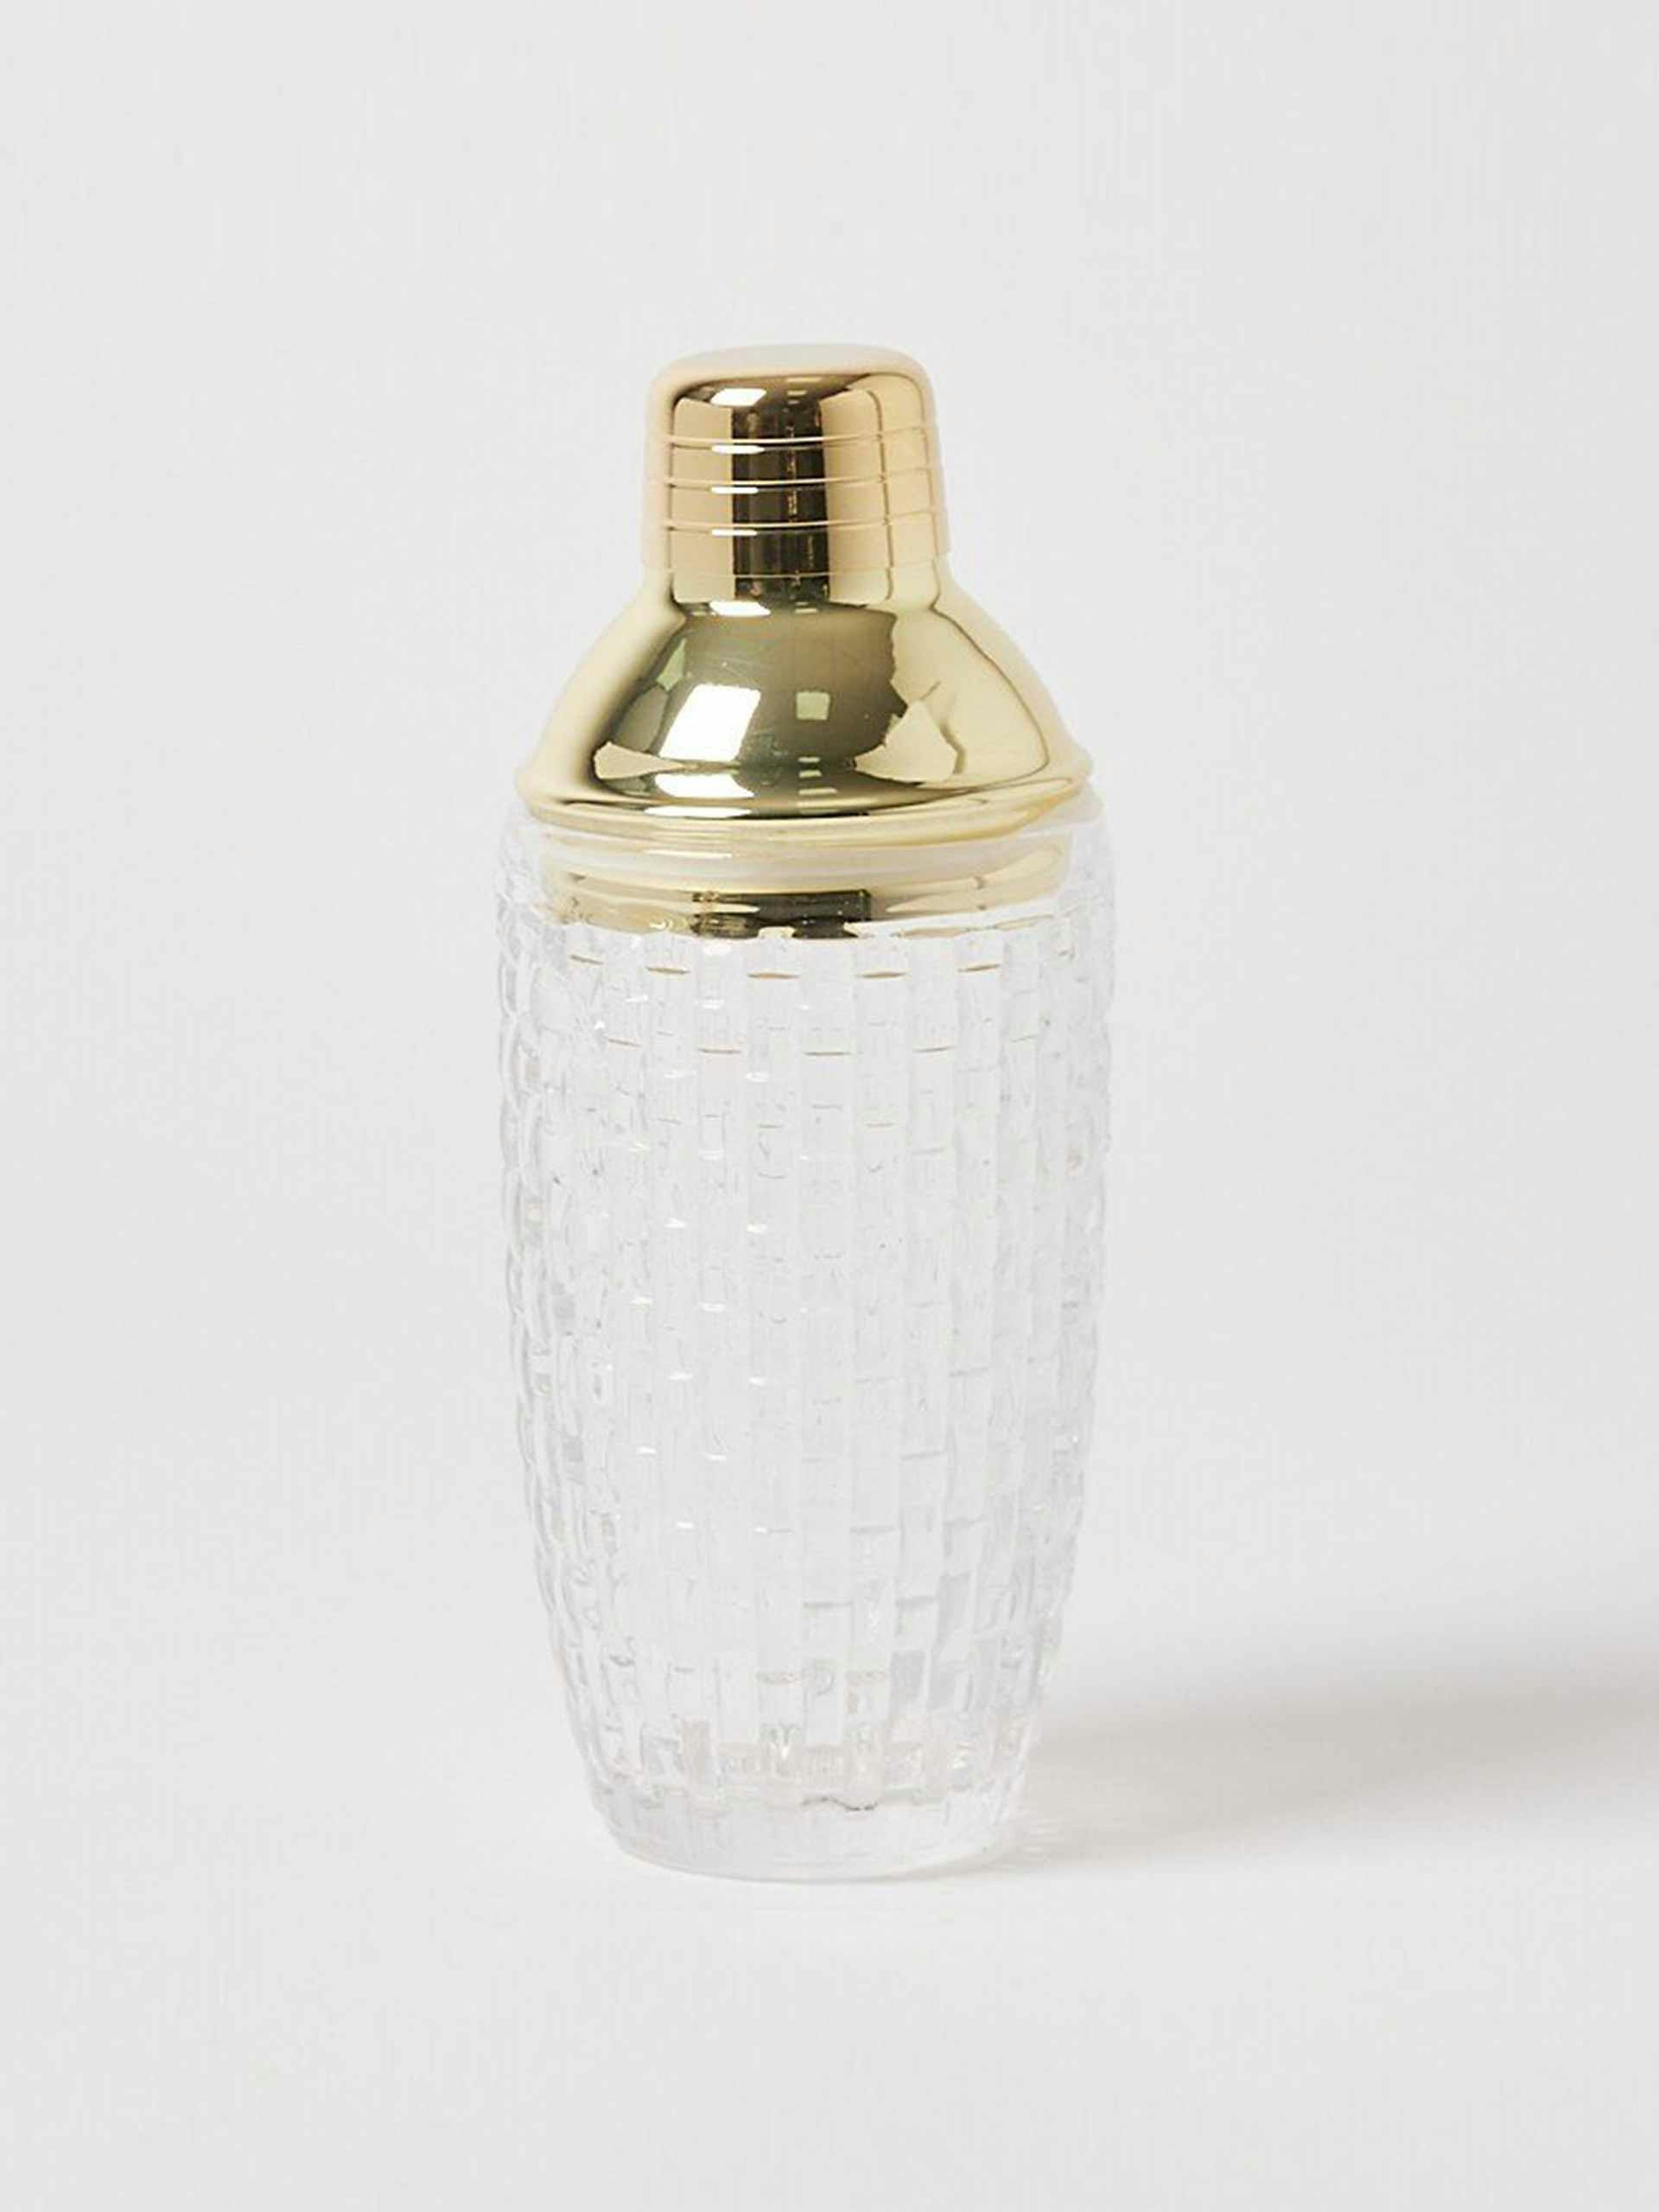 Gold metal and glass cocktail shaker